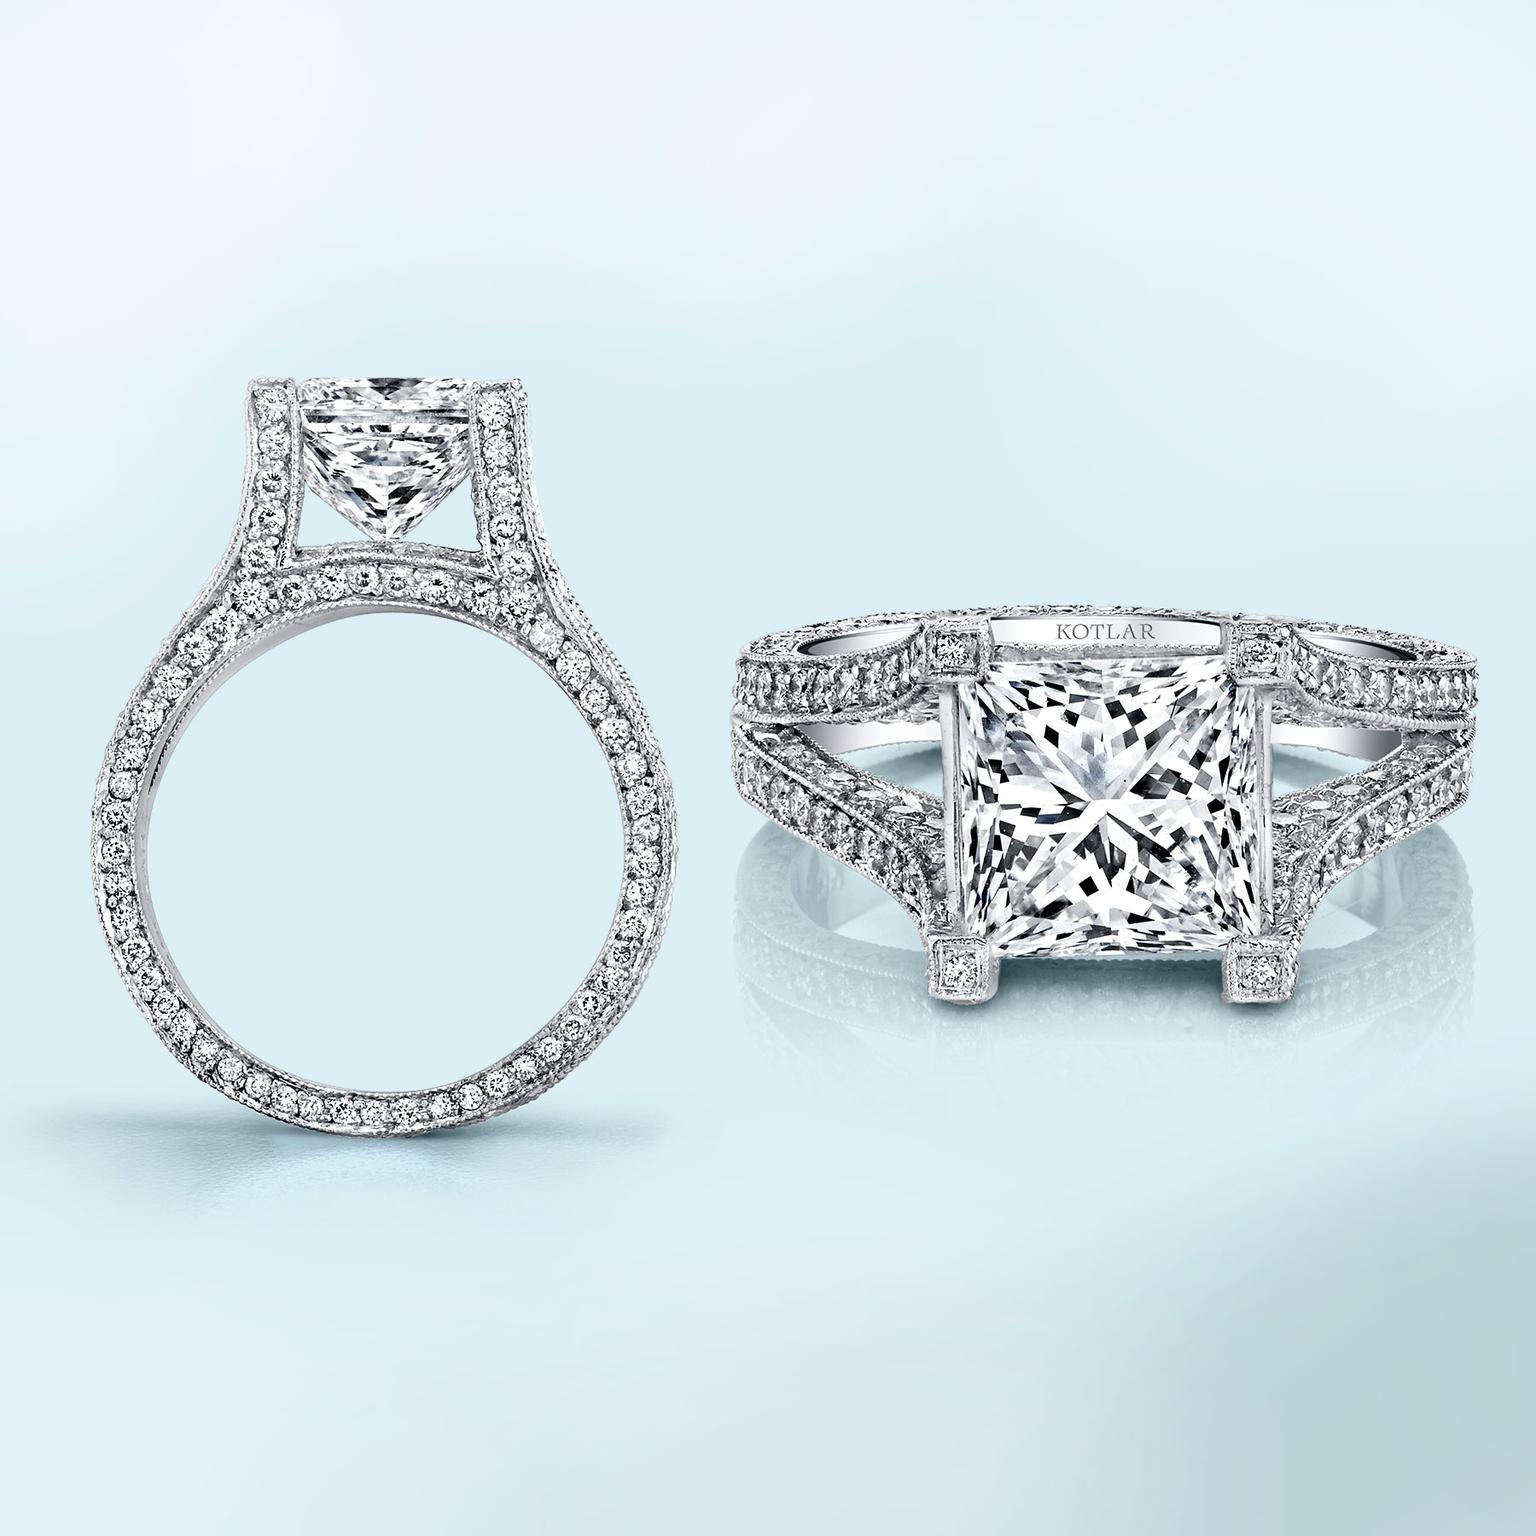 Tiffany Style Diamond Rings – Where Are the Best Places to Buy?